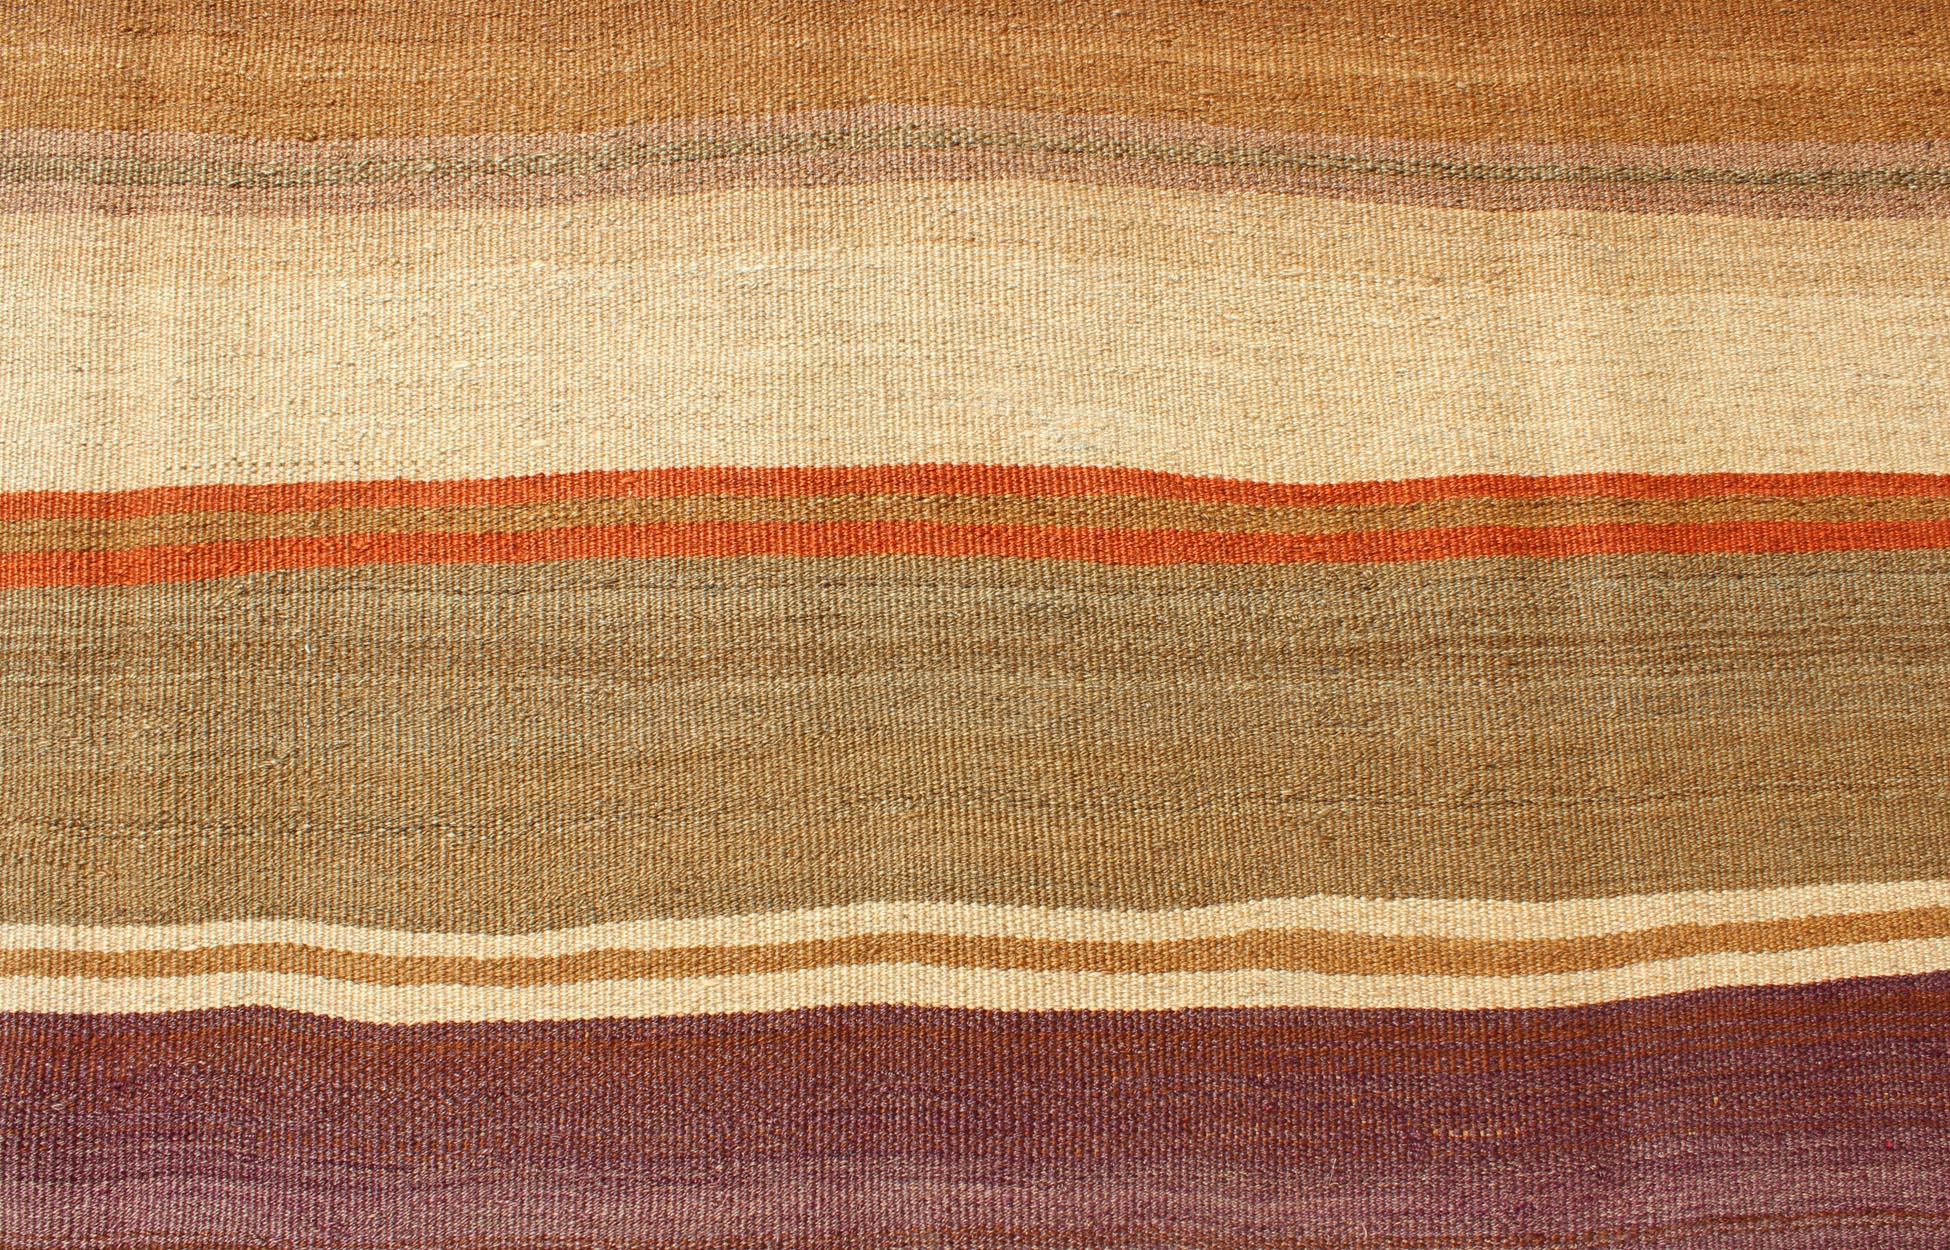 Wool Multicolored Vintage Kilim Large Gallery Rug With Stripe For Sale